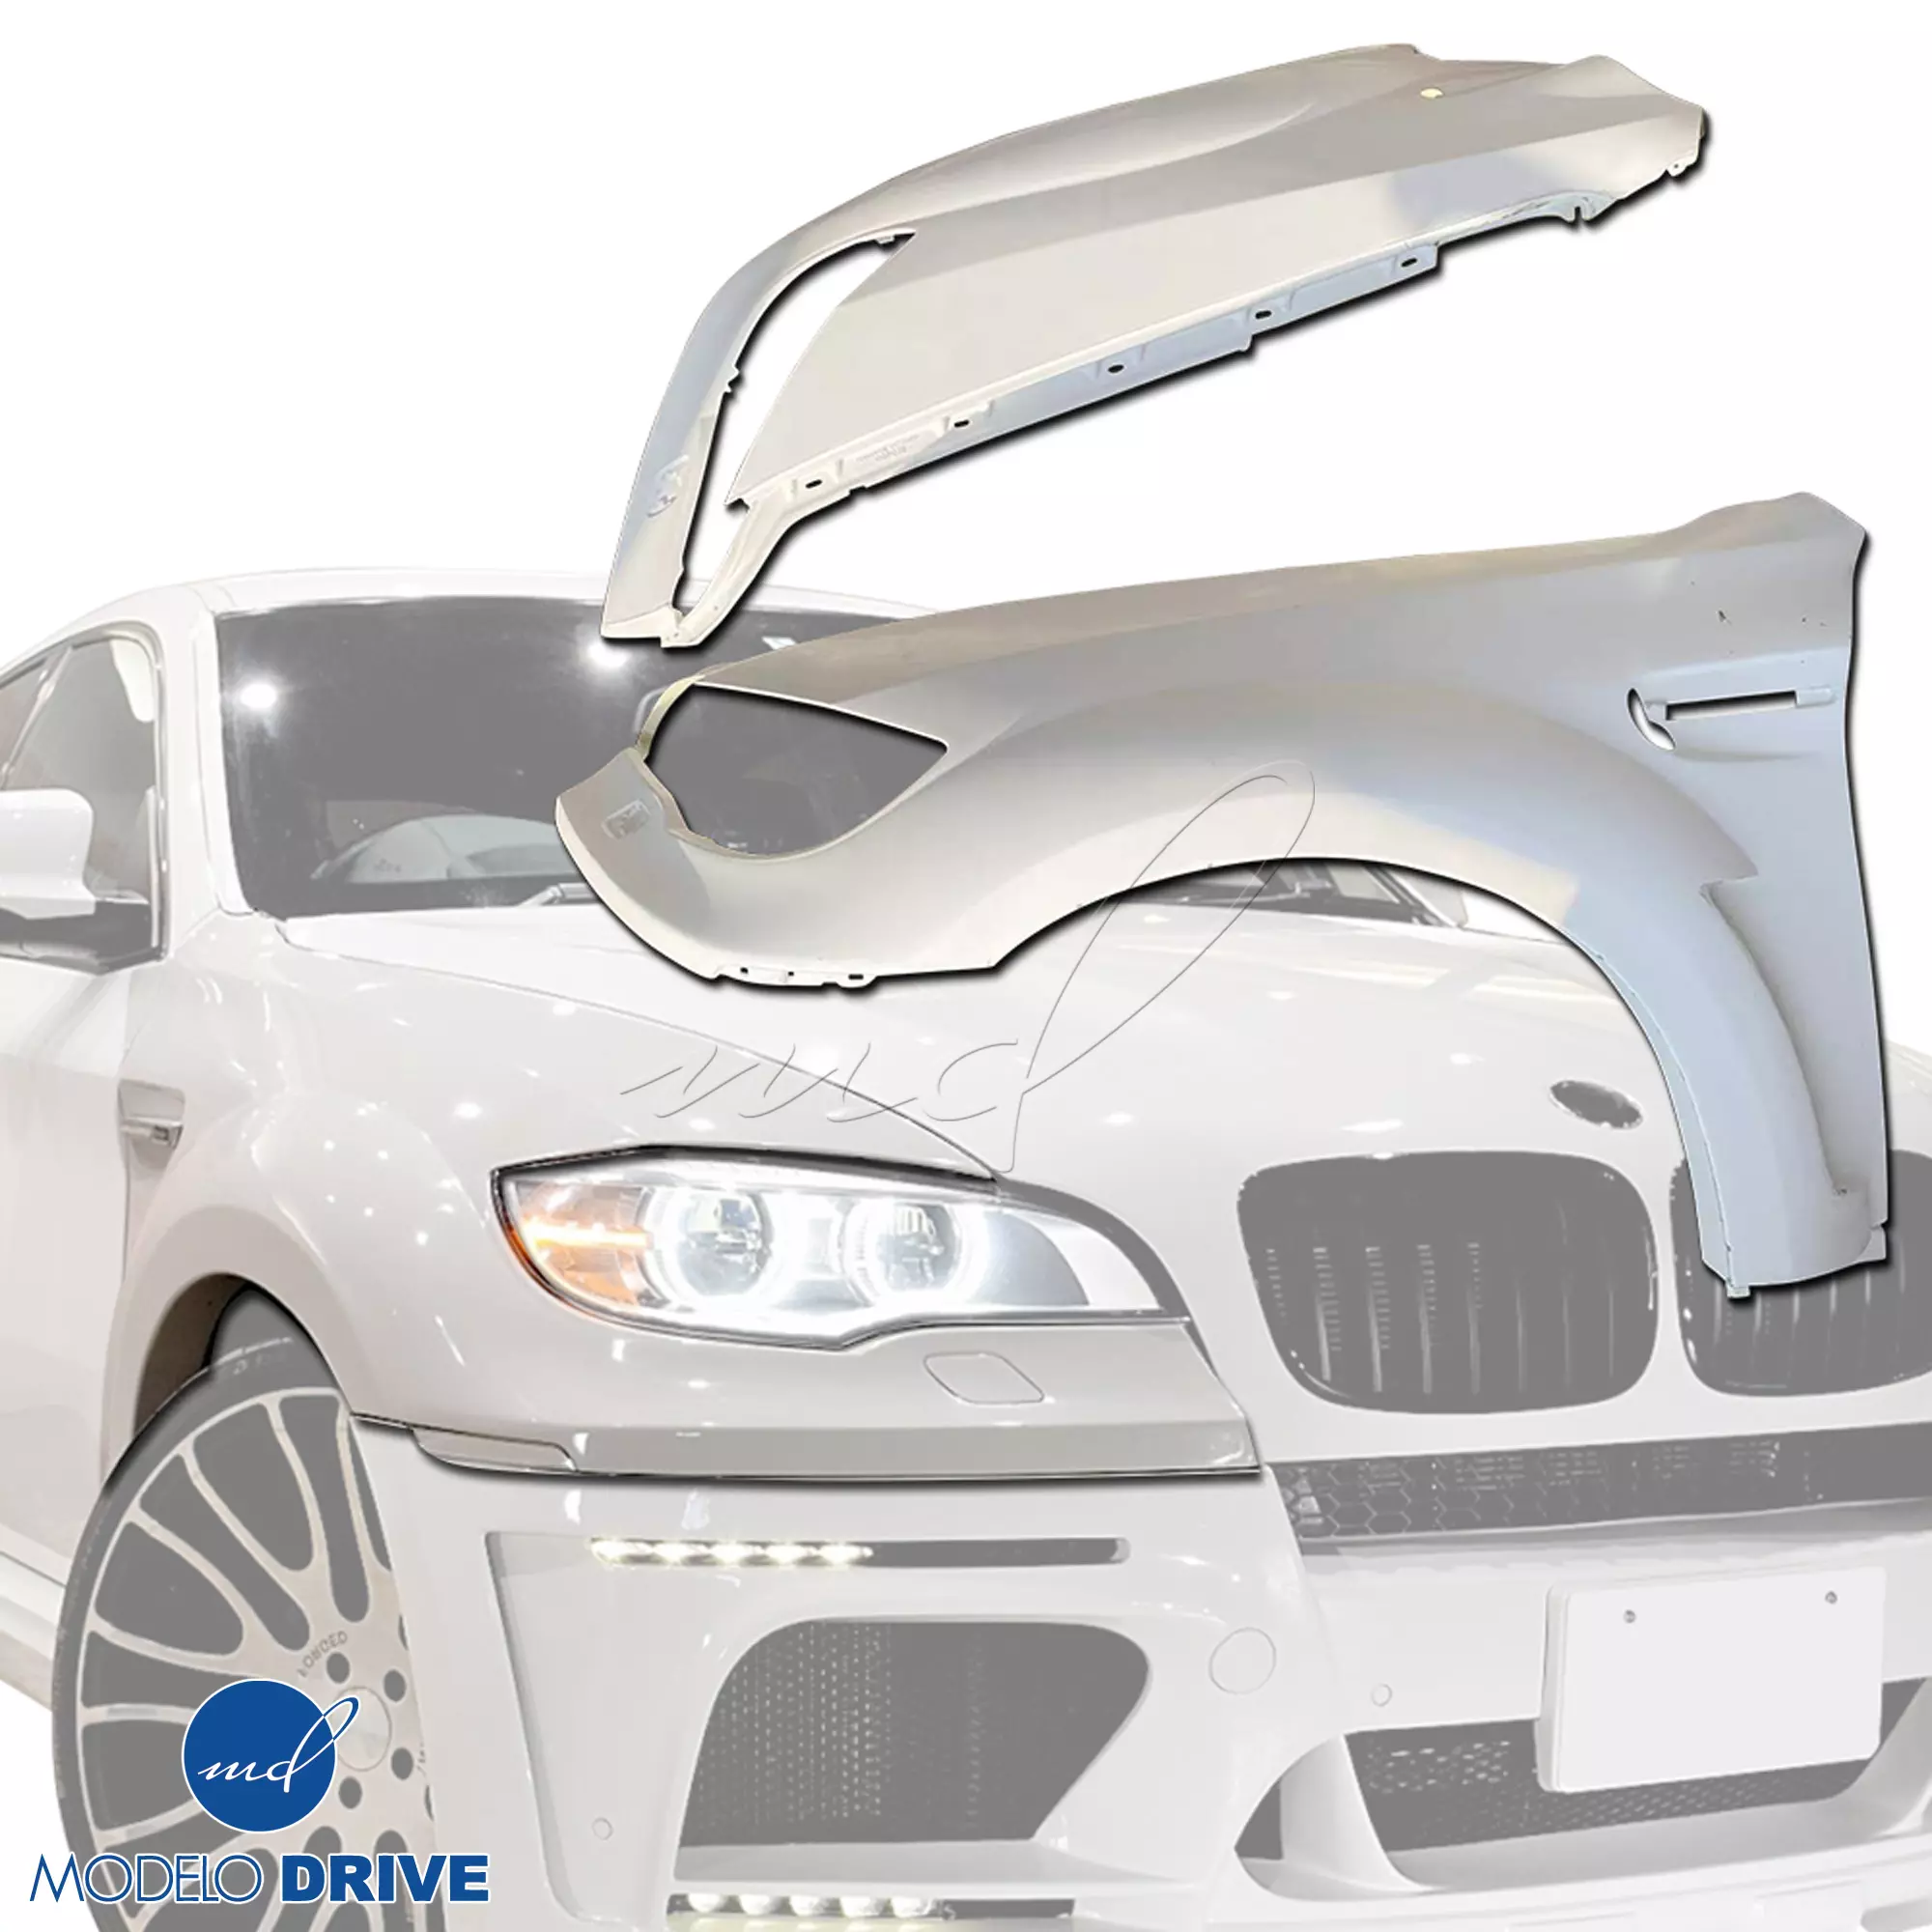 ModeloDrive FRP HAMA Wide Body Fenders (front) 2pc > BMW X6 E71 2008-2014 - Image 22